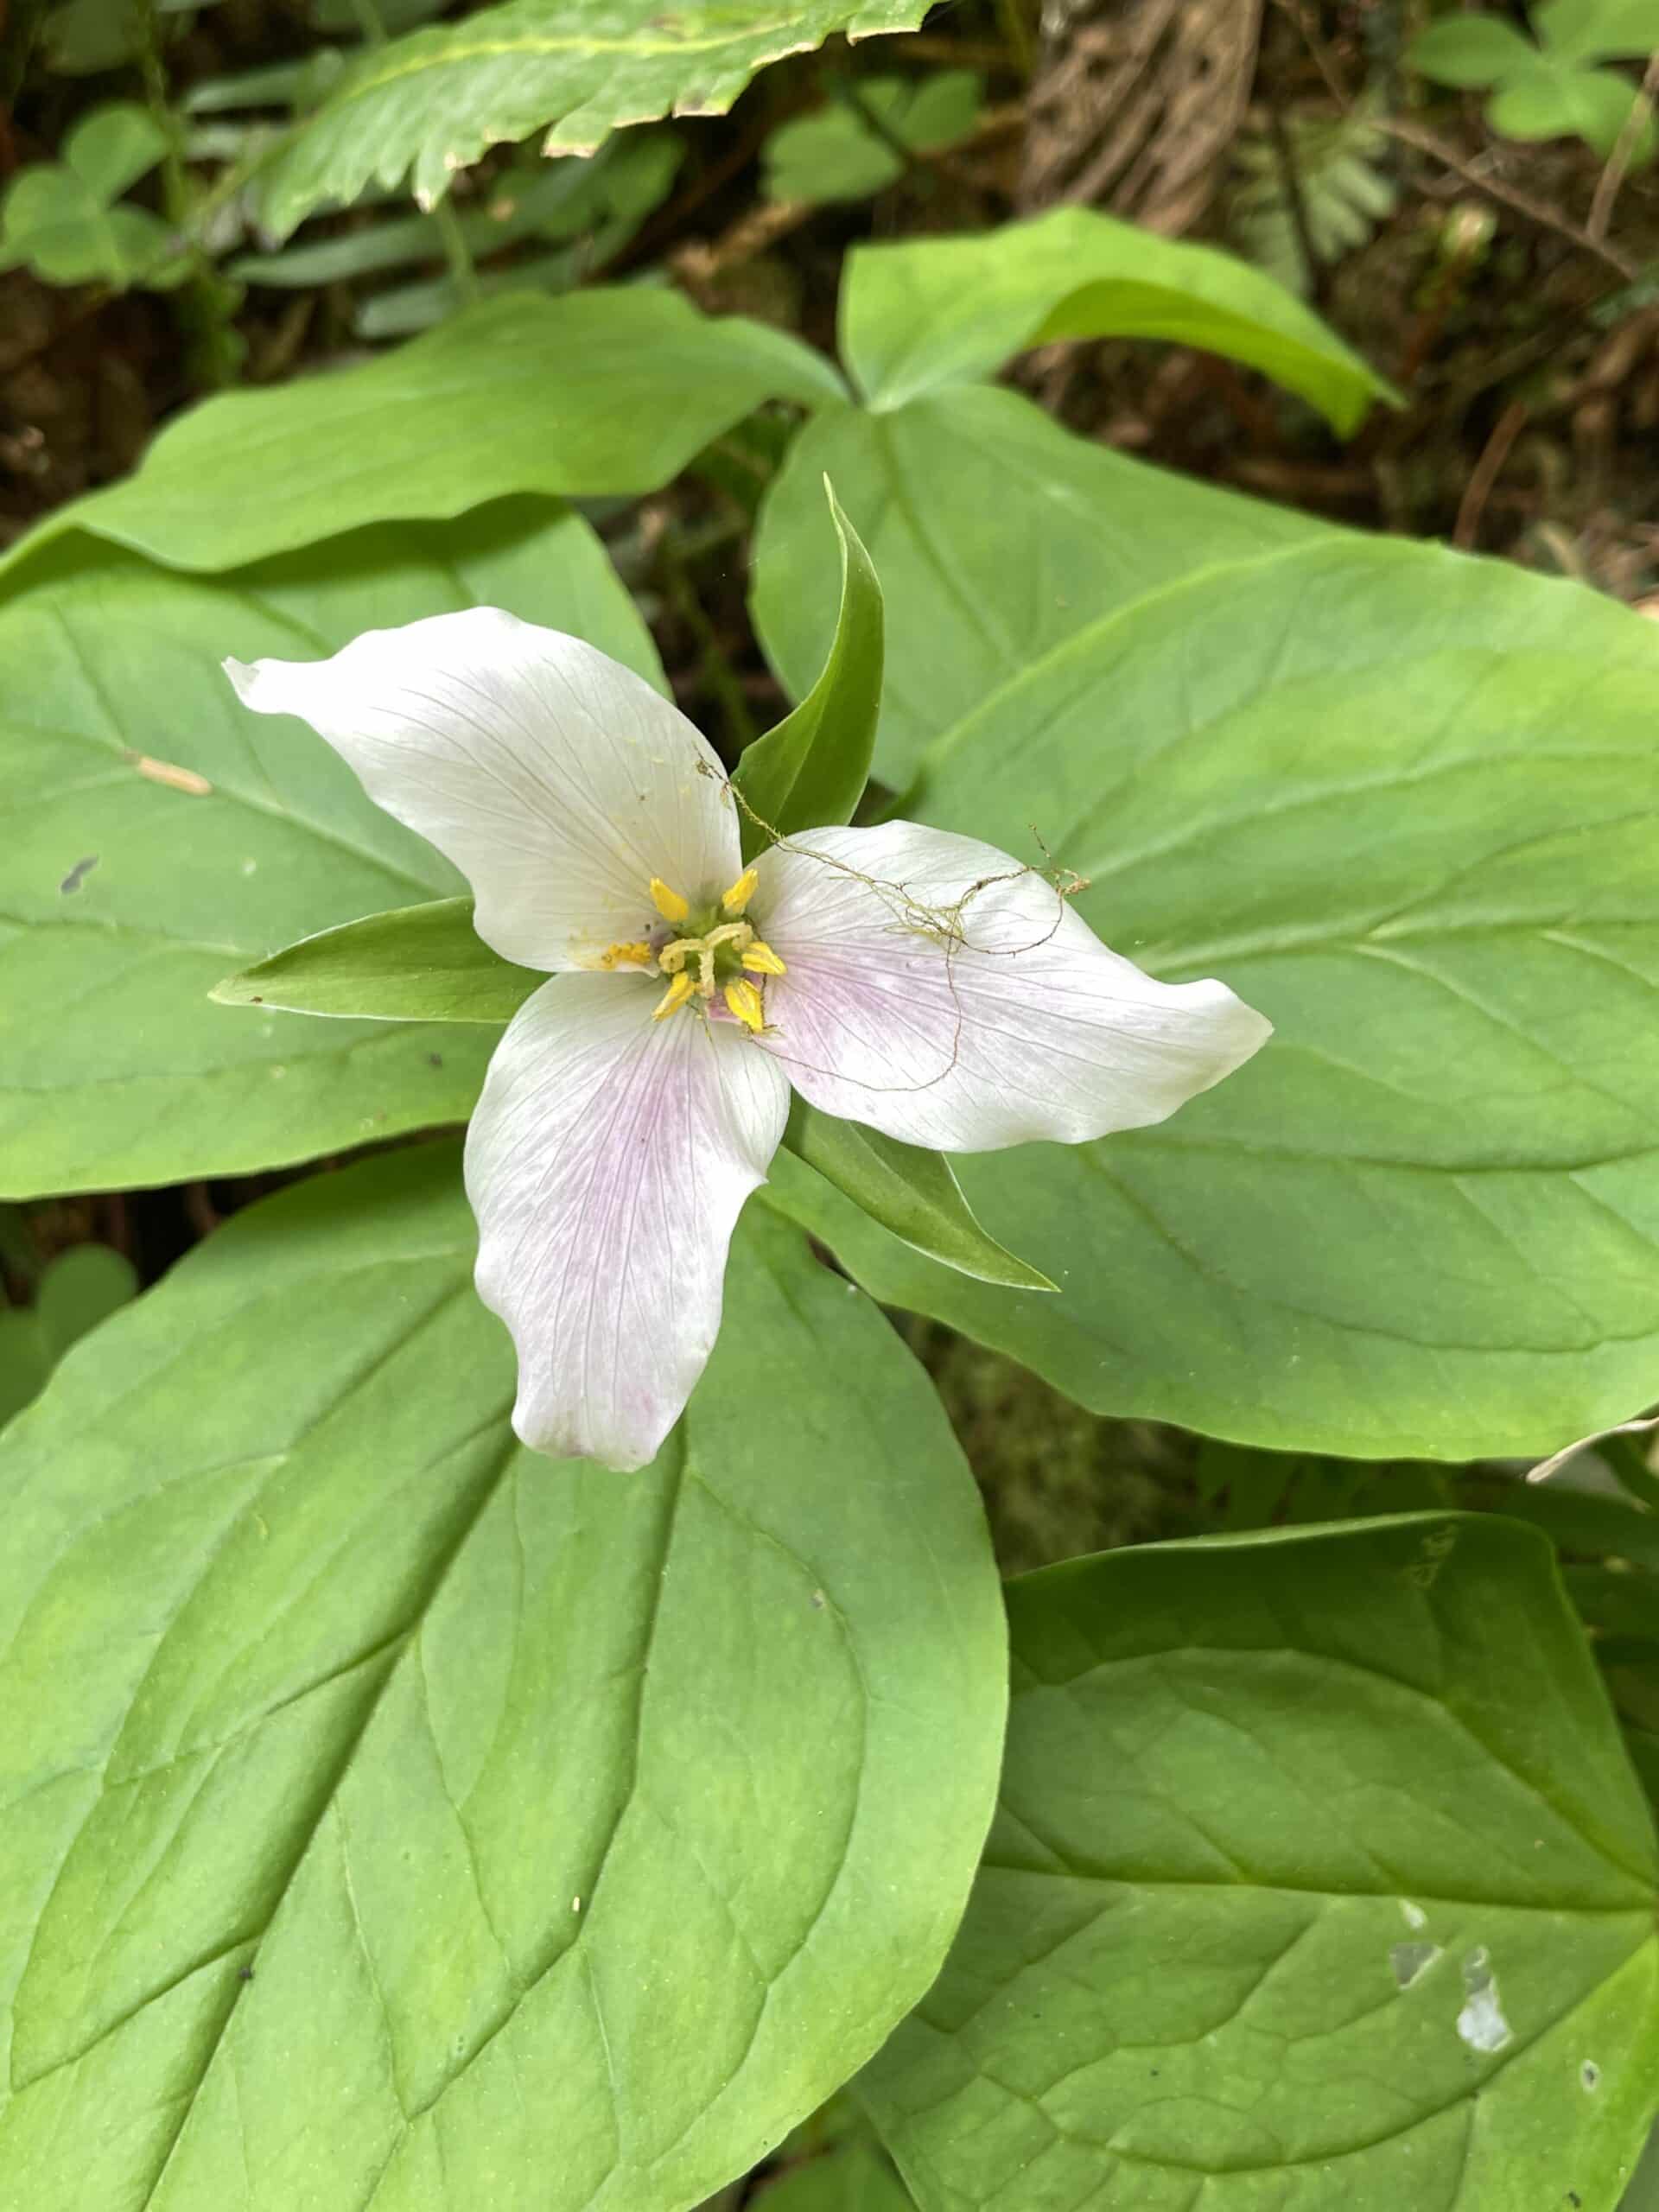 a single trillium flower with large green leaves